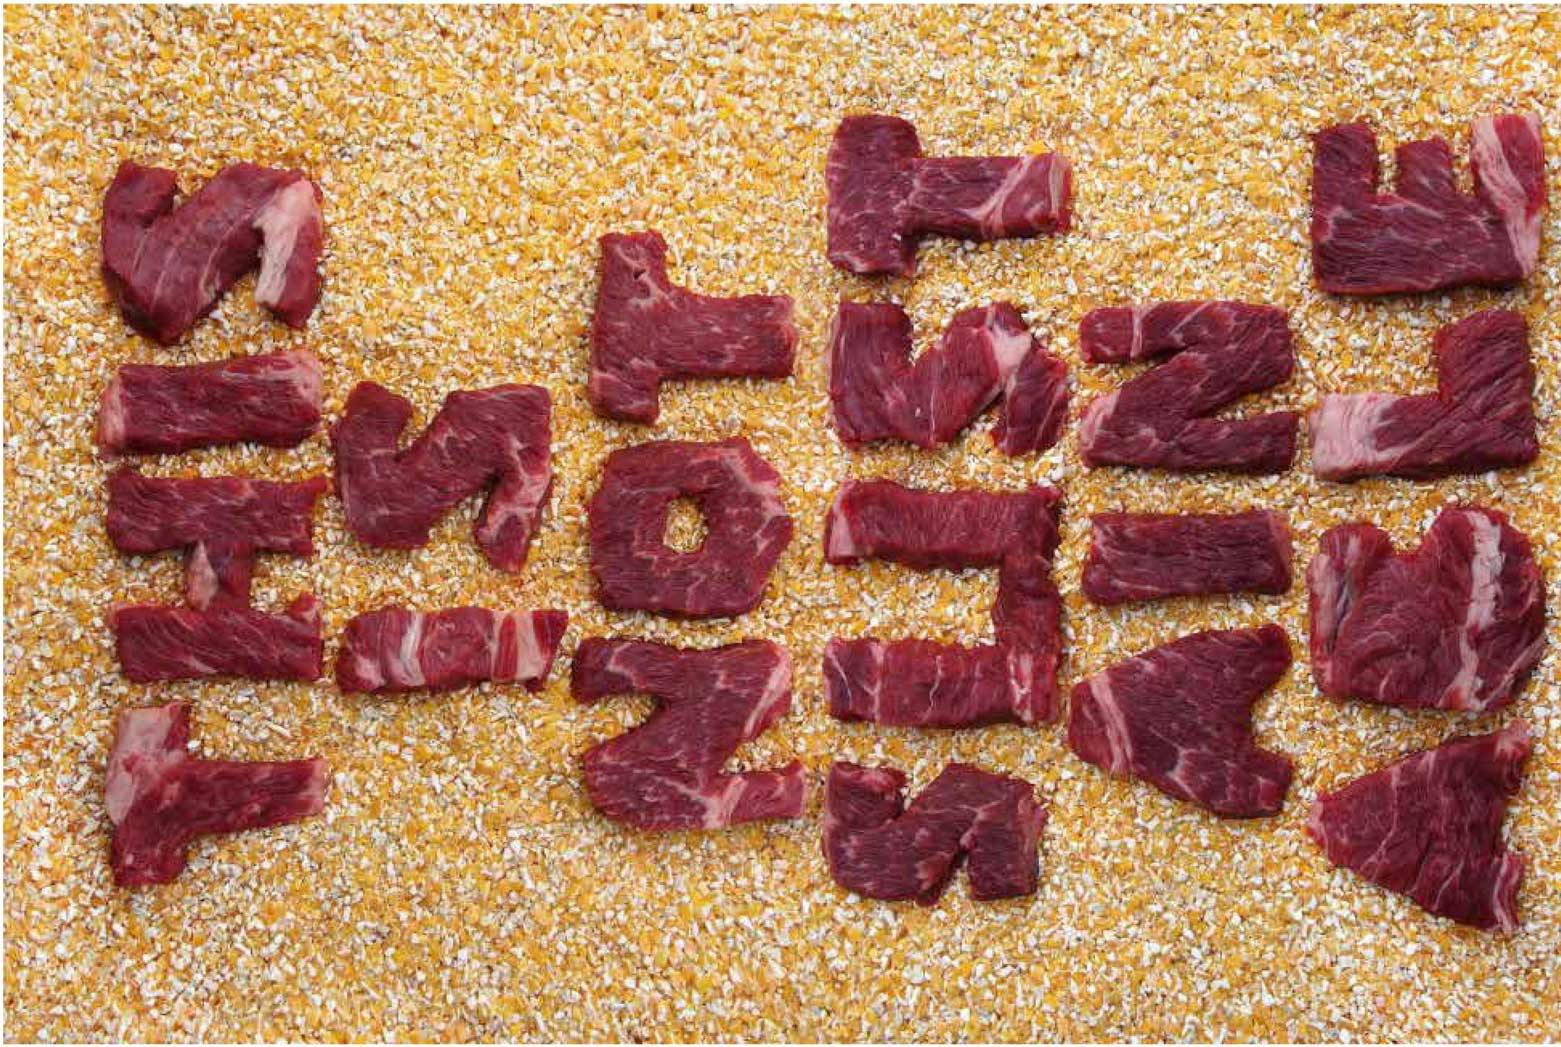 Pieces of beef cut into letters that spell "This is not sustainable" arranged on a backdrop of animal feed.